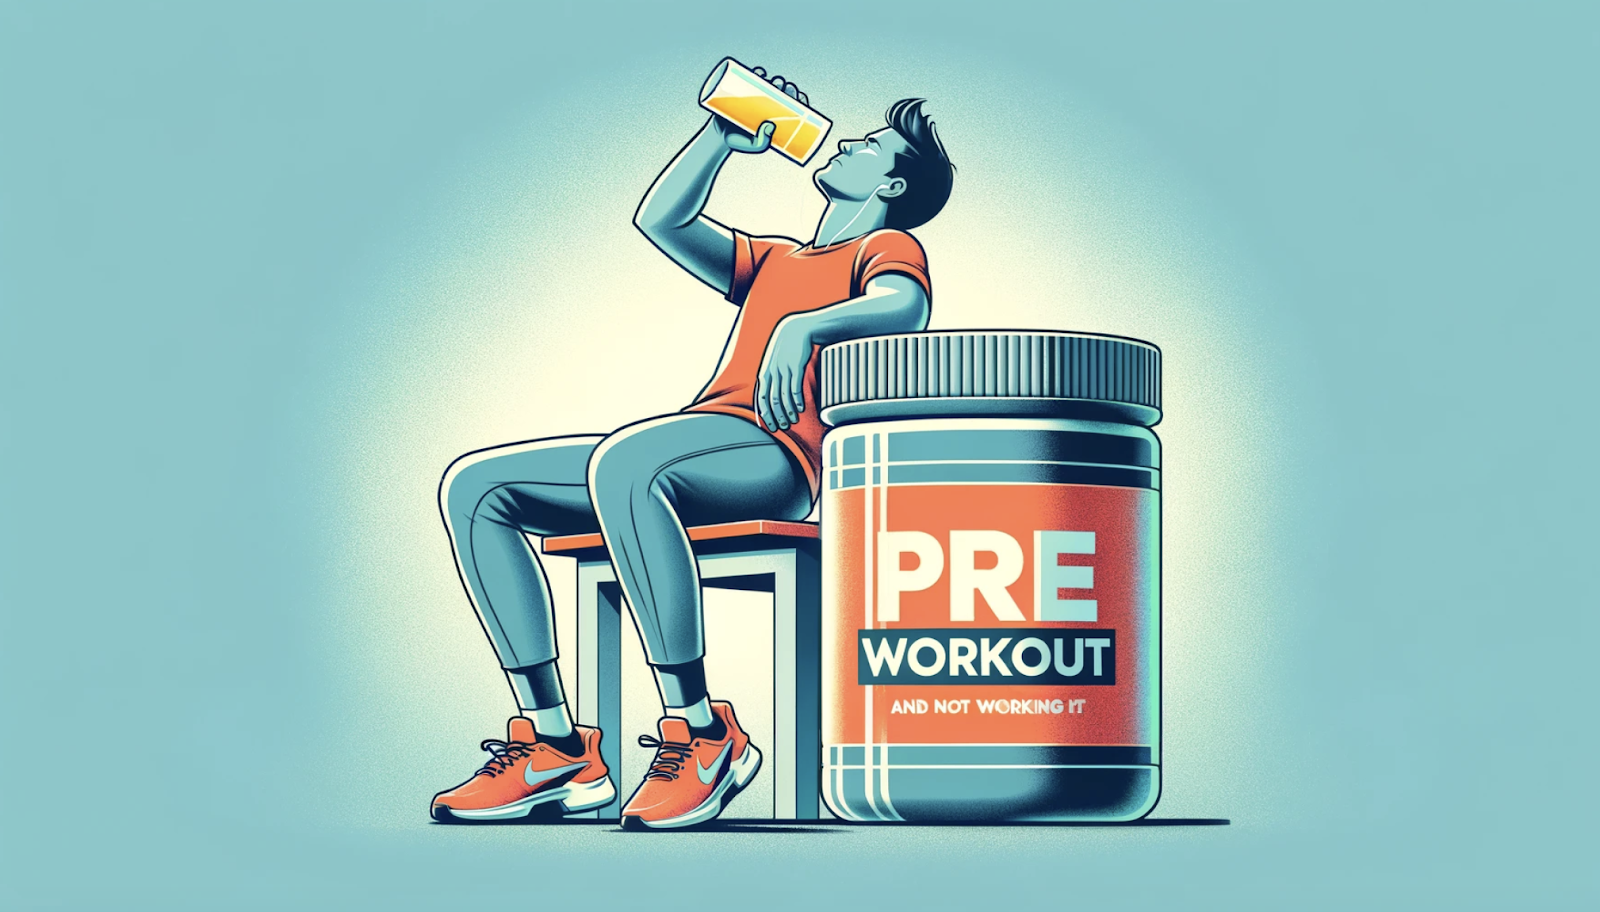 Drinking Pre Workout And Not Working Out: What Happens?